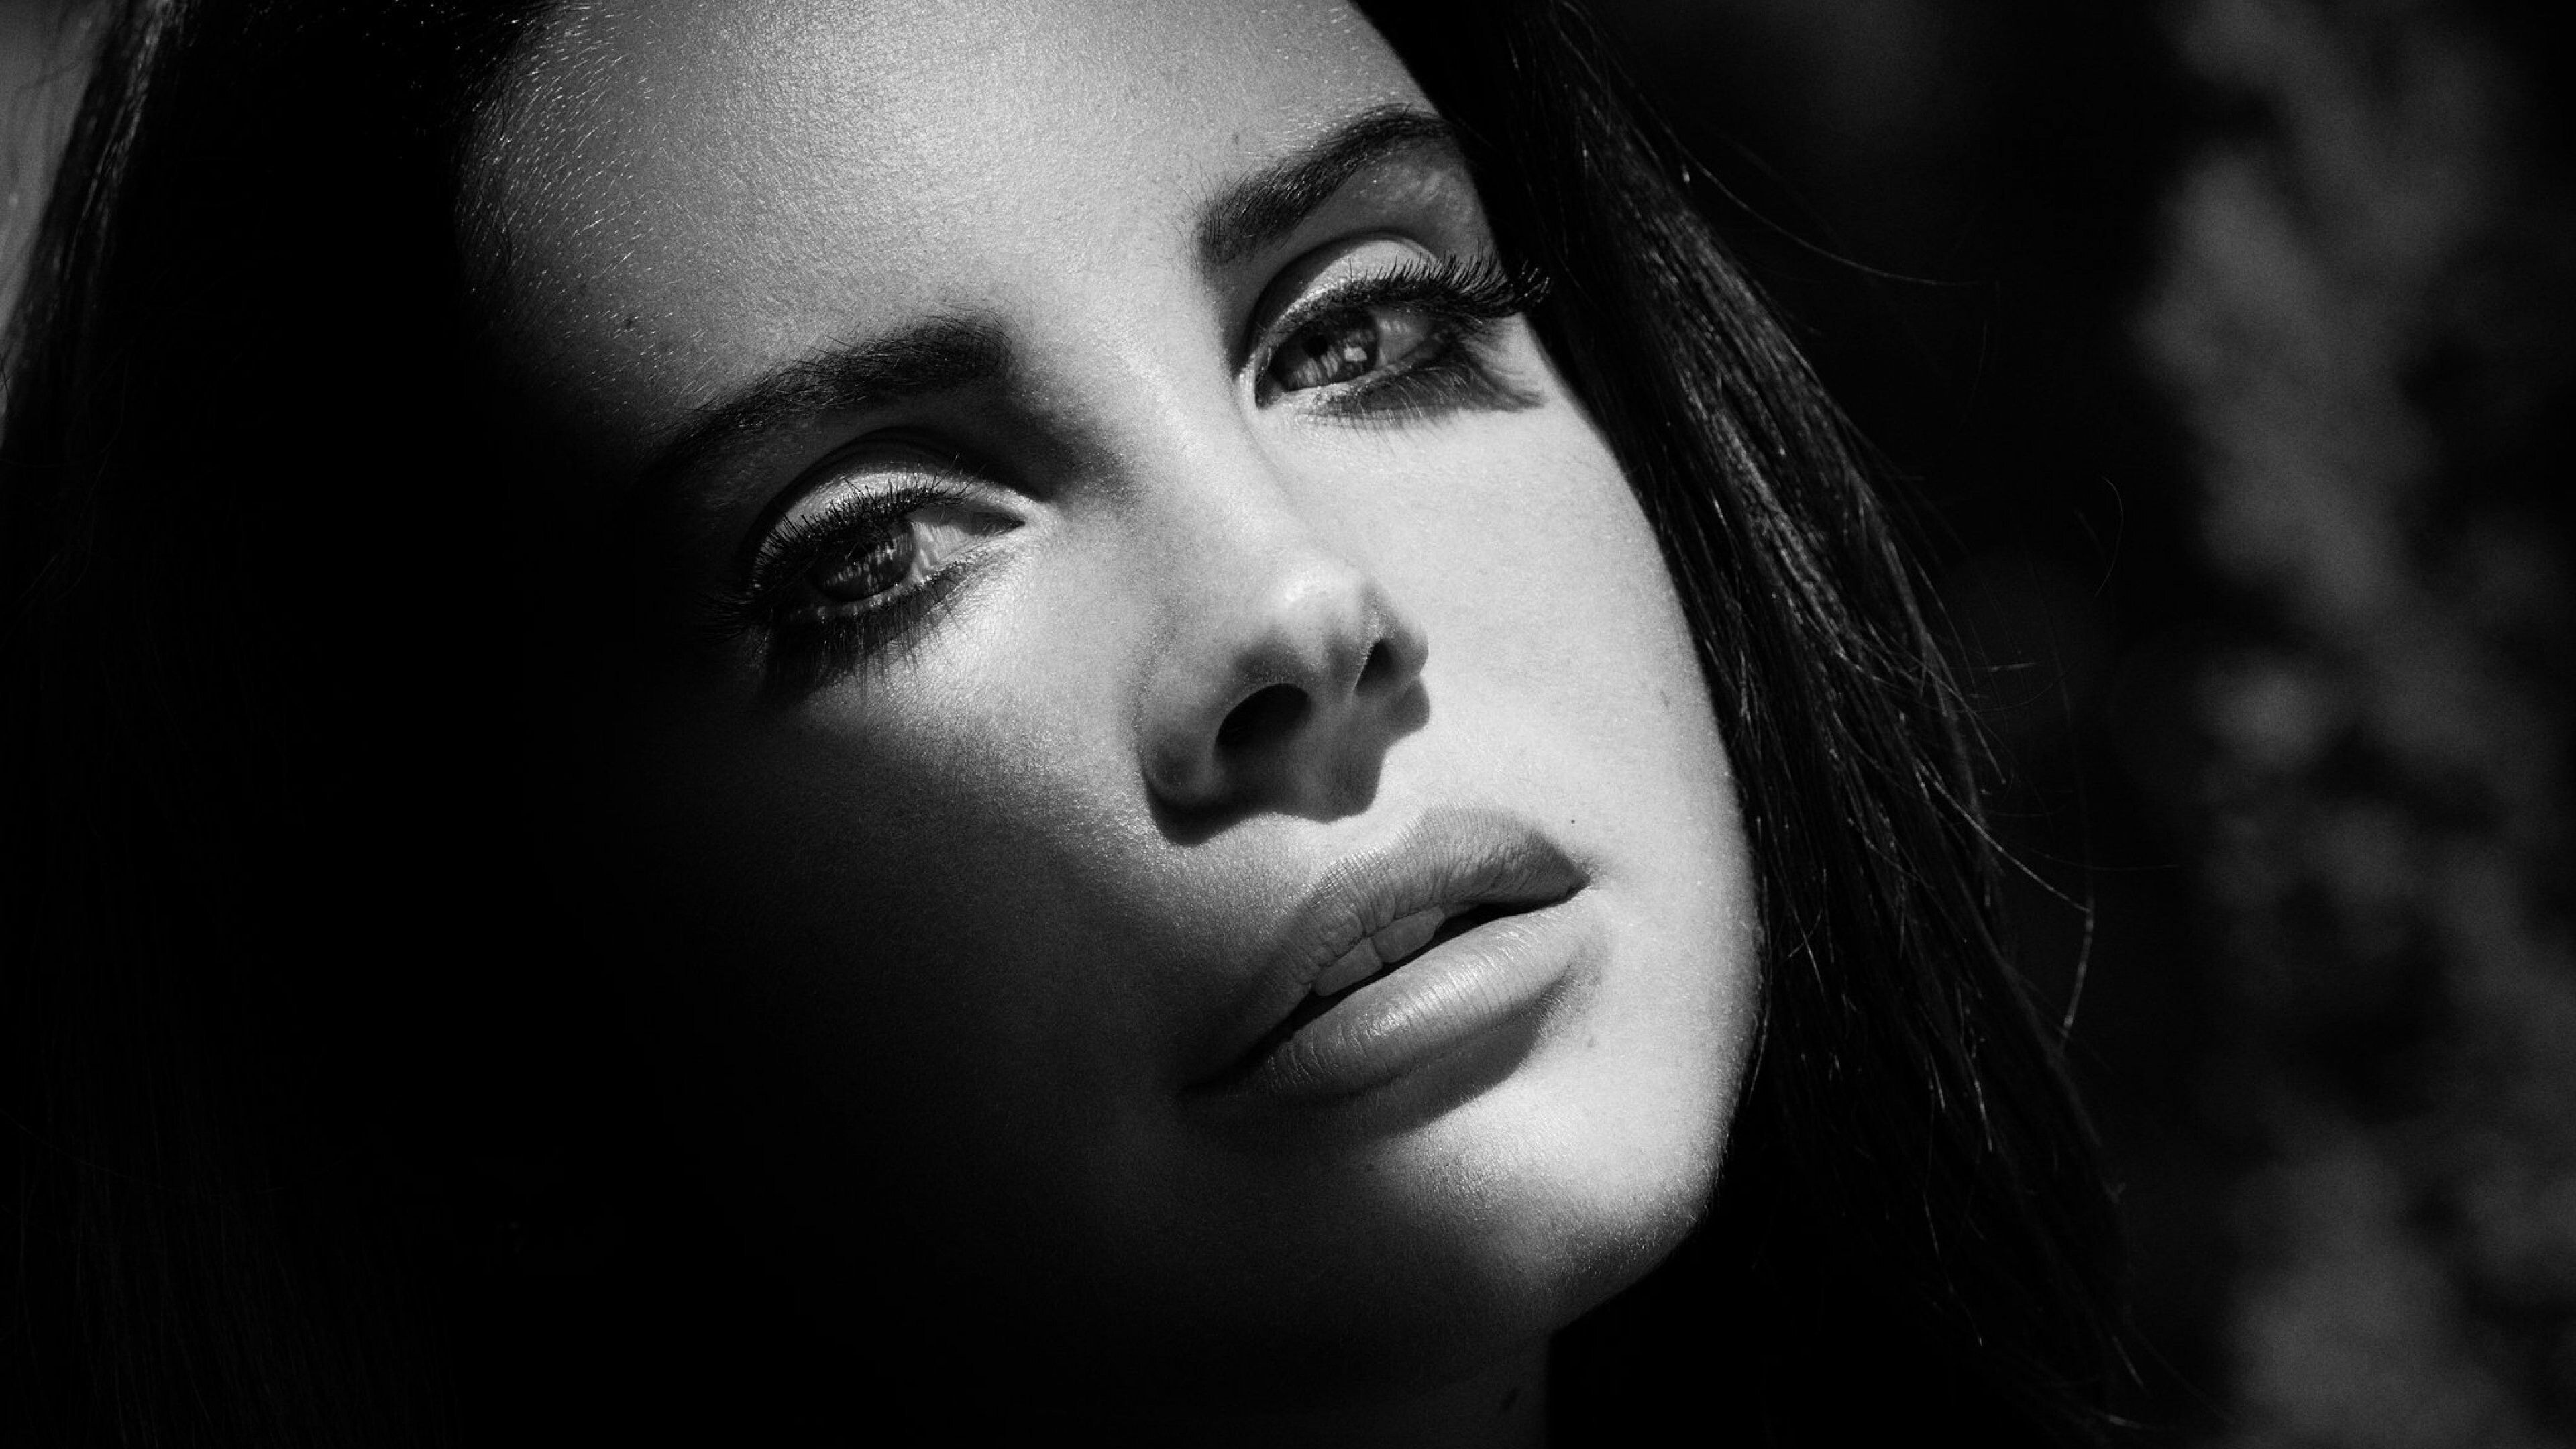 Black and white portrait of a beautiful woman with a dramatic makeup look - Lana Del Rey